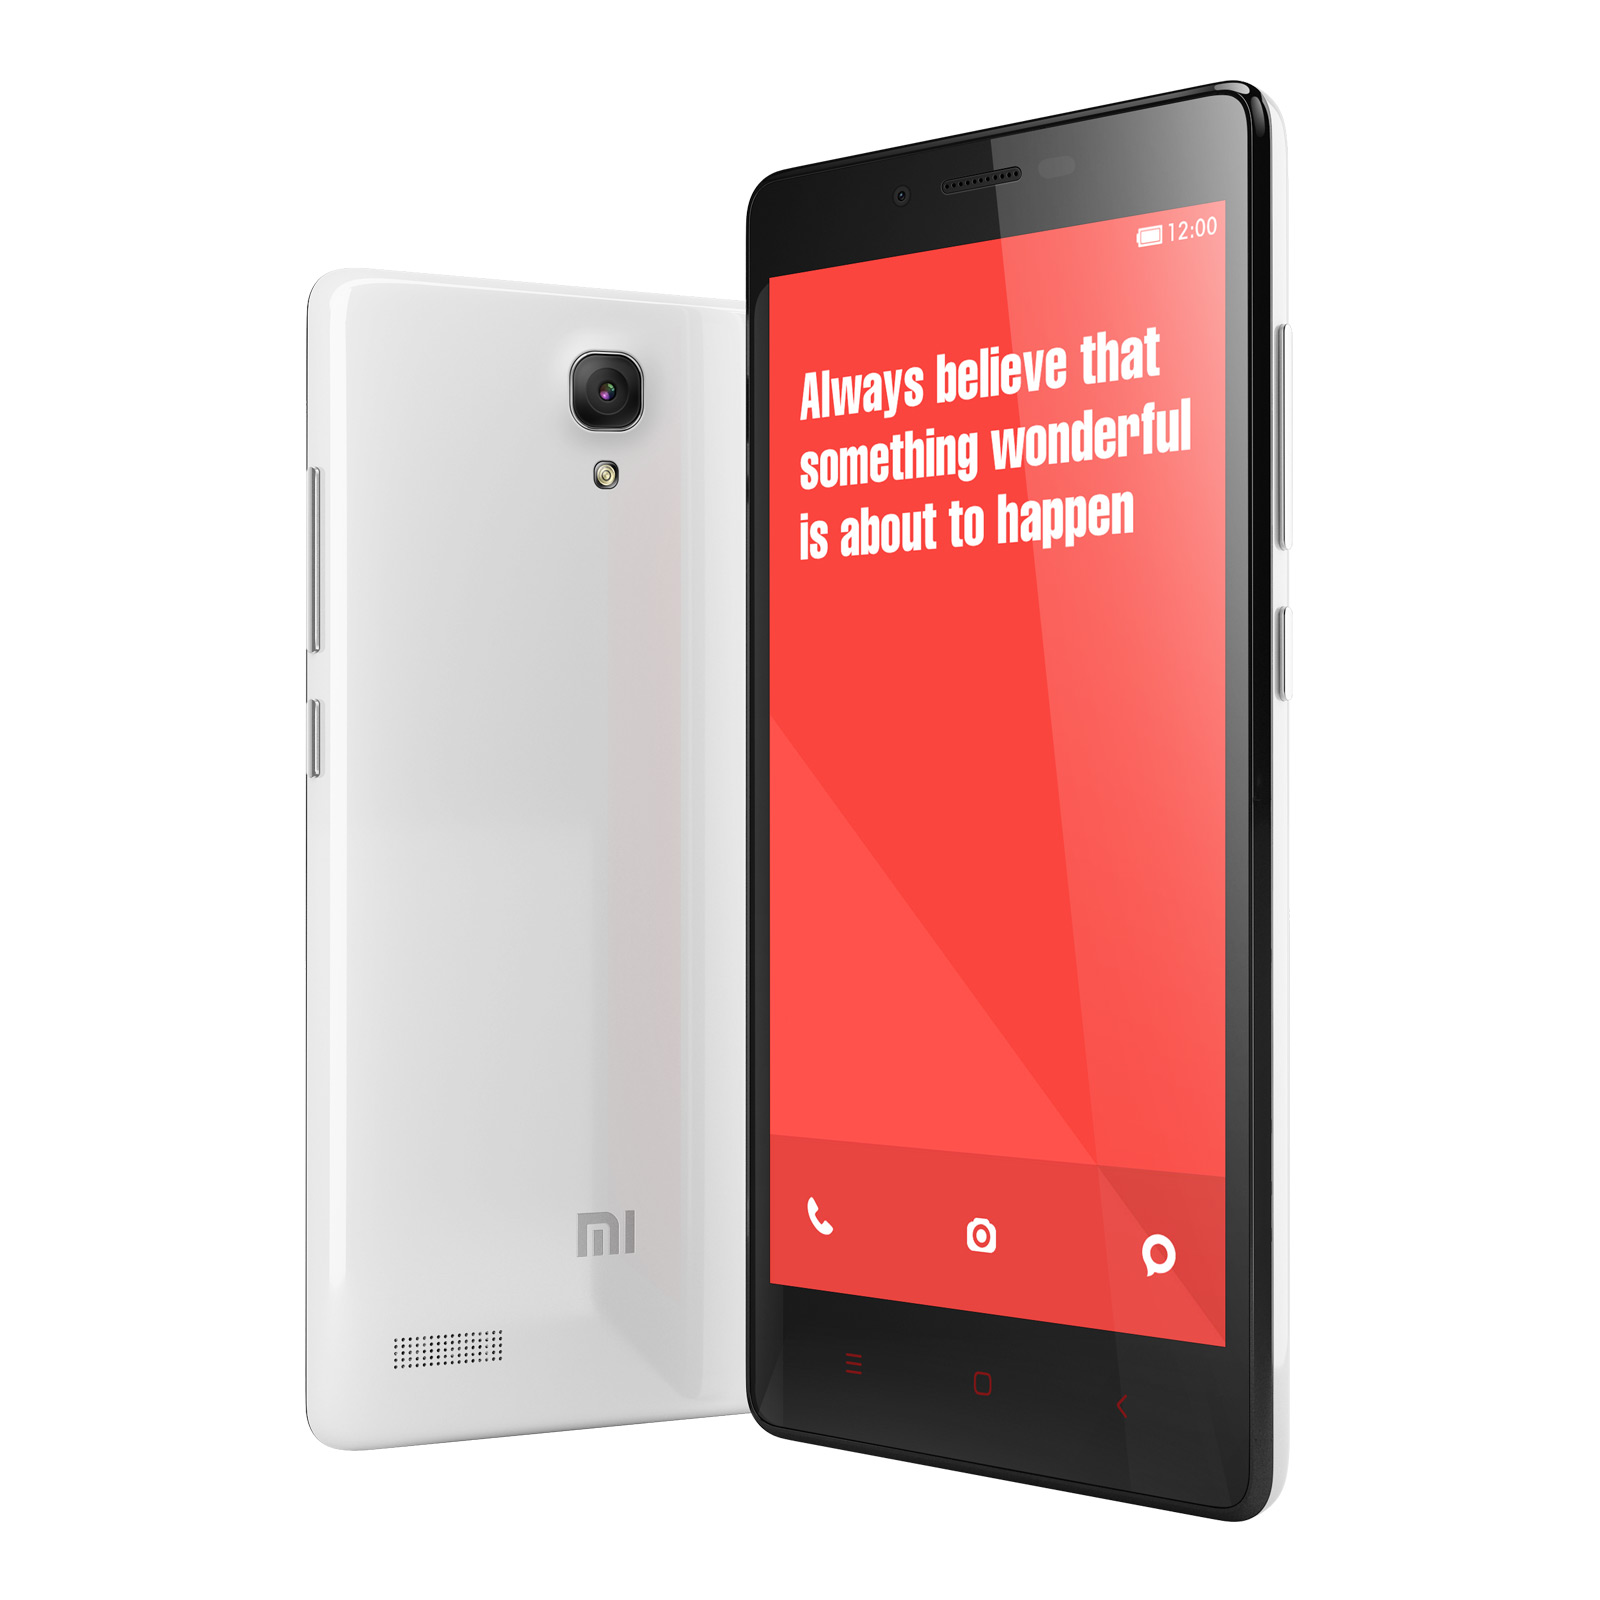 buy xiaomi phone online in india could leave, received